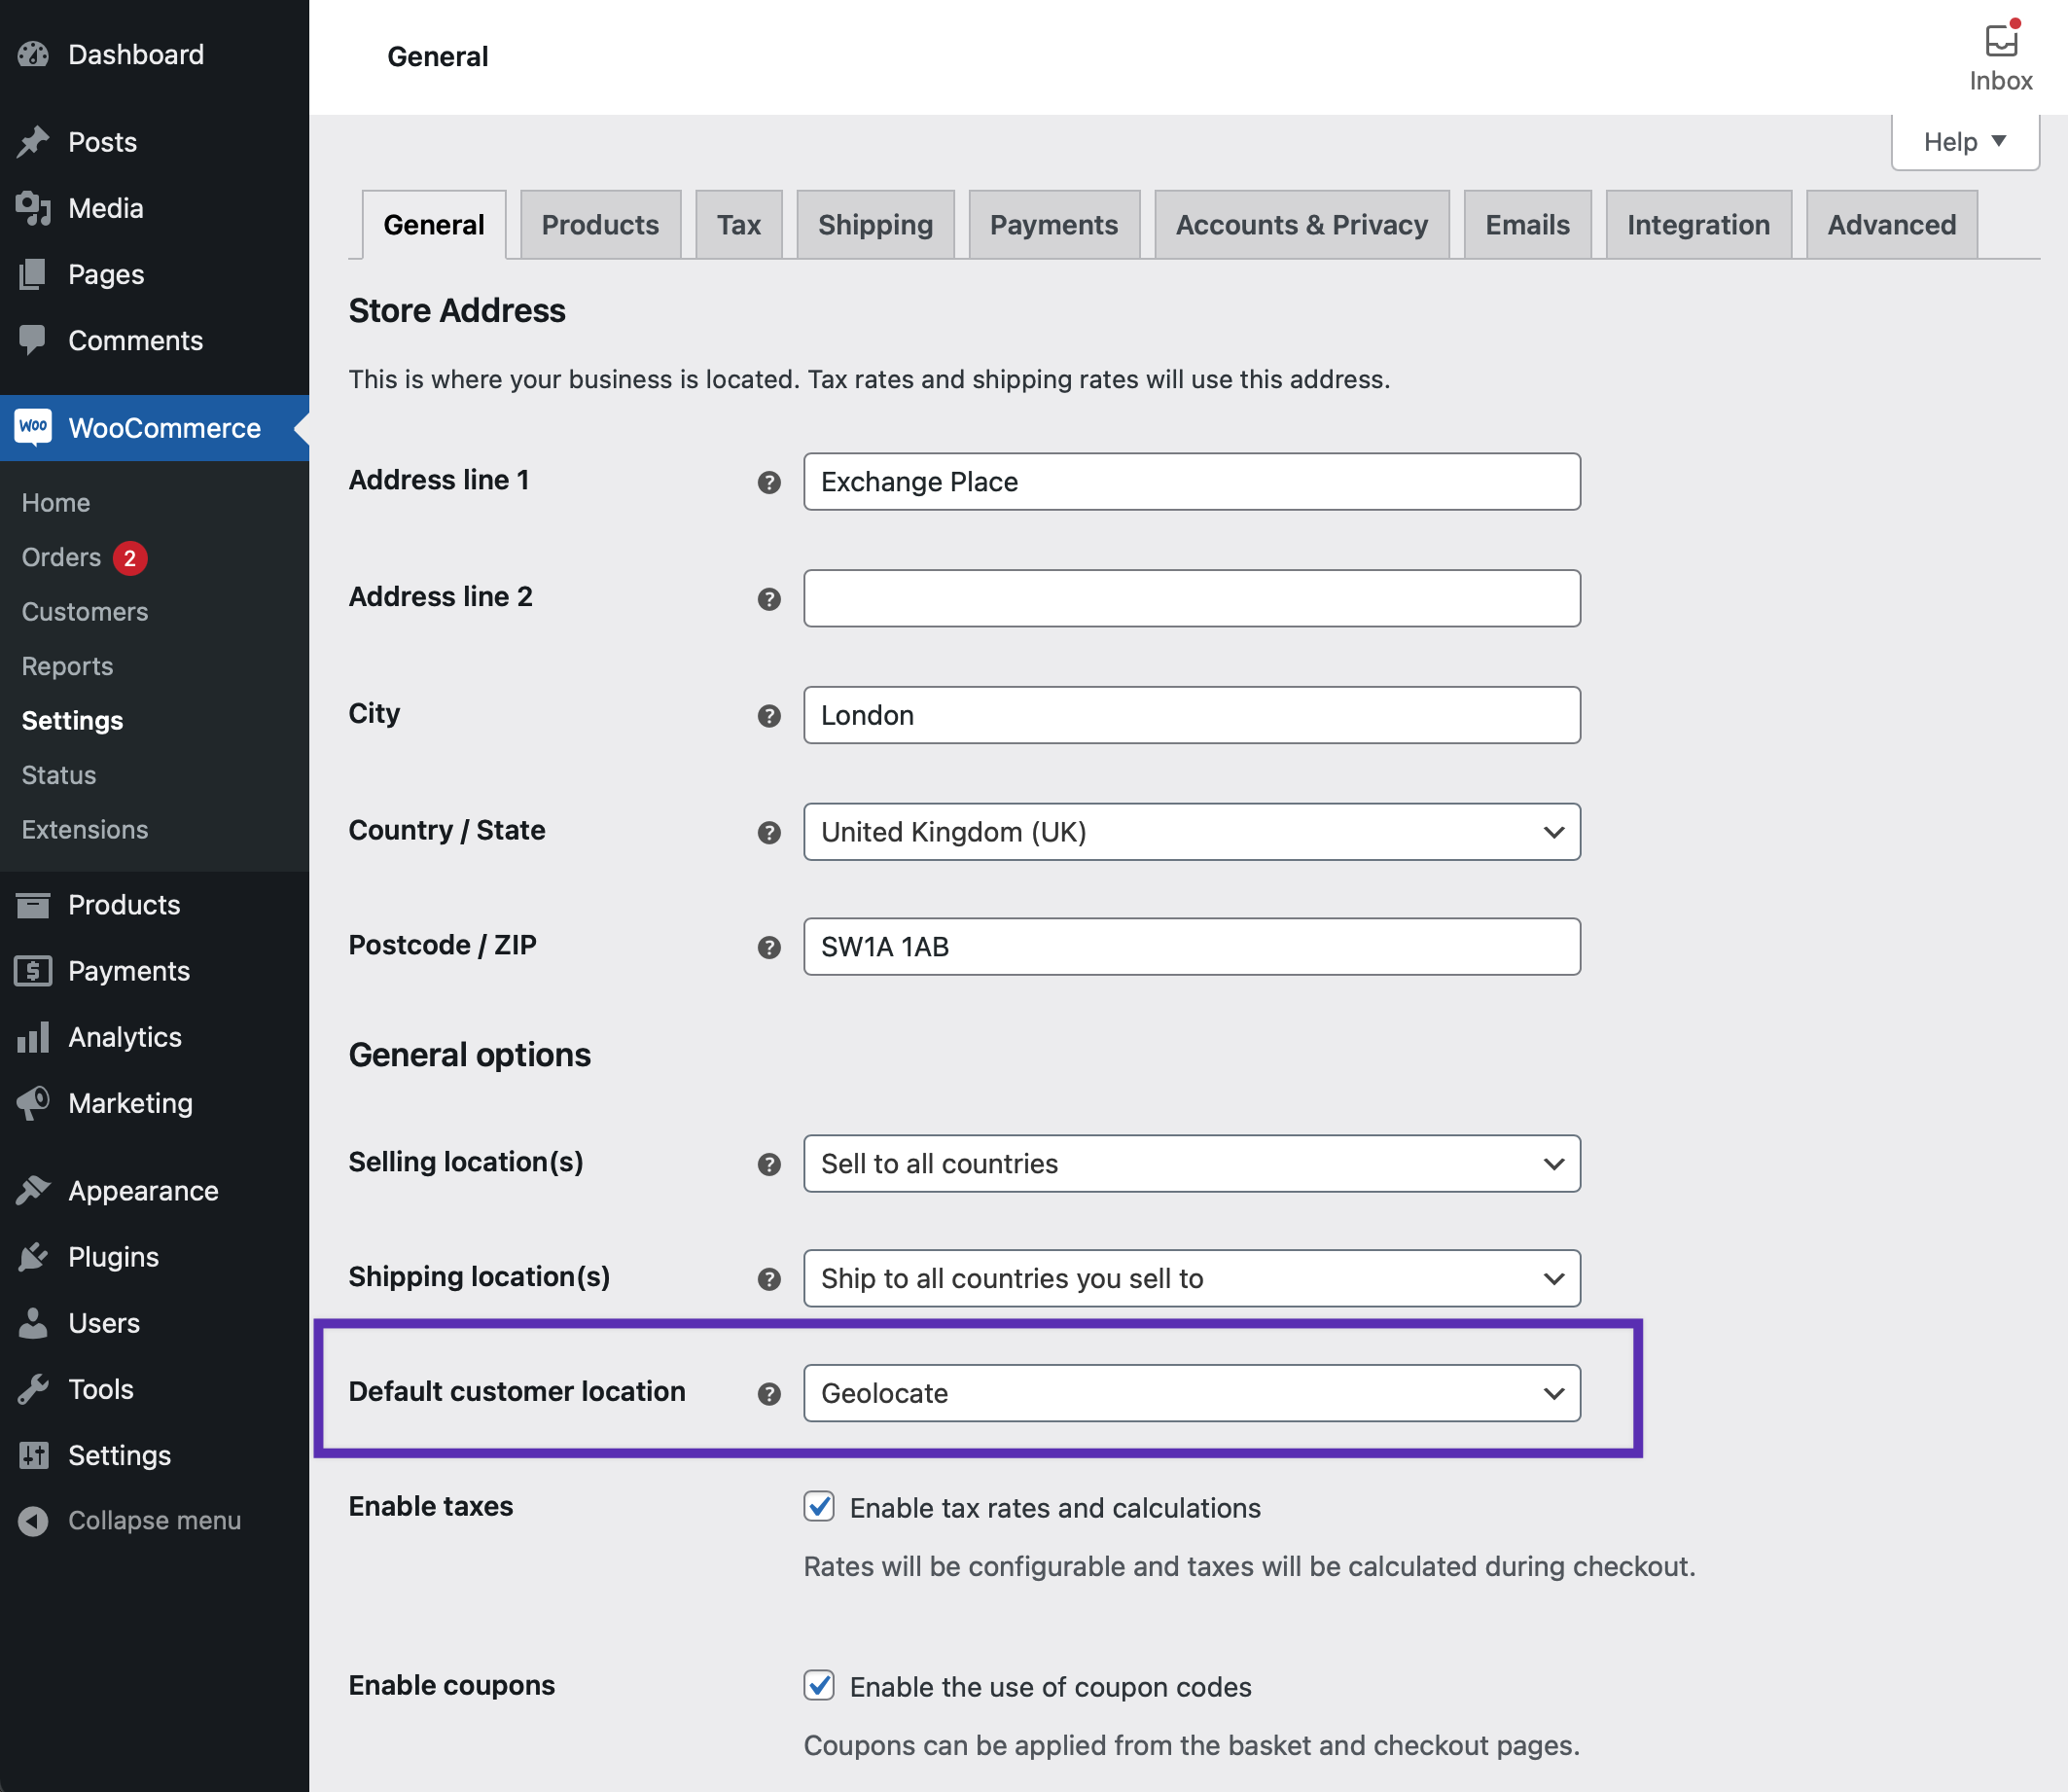 WooCommerce General Settings with a highlighted box around the setting for Default customer location, "Geolocate" is set